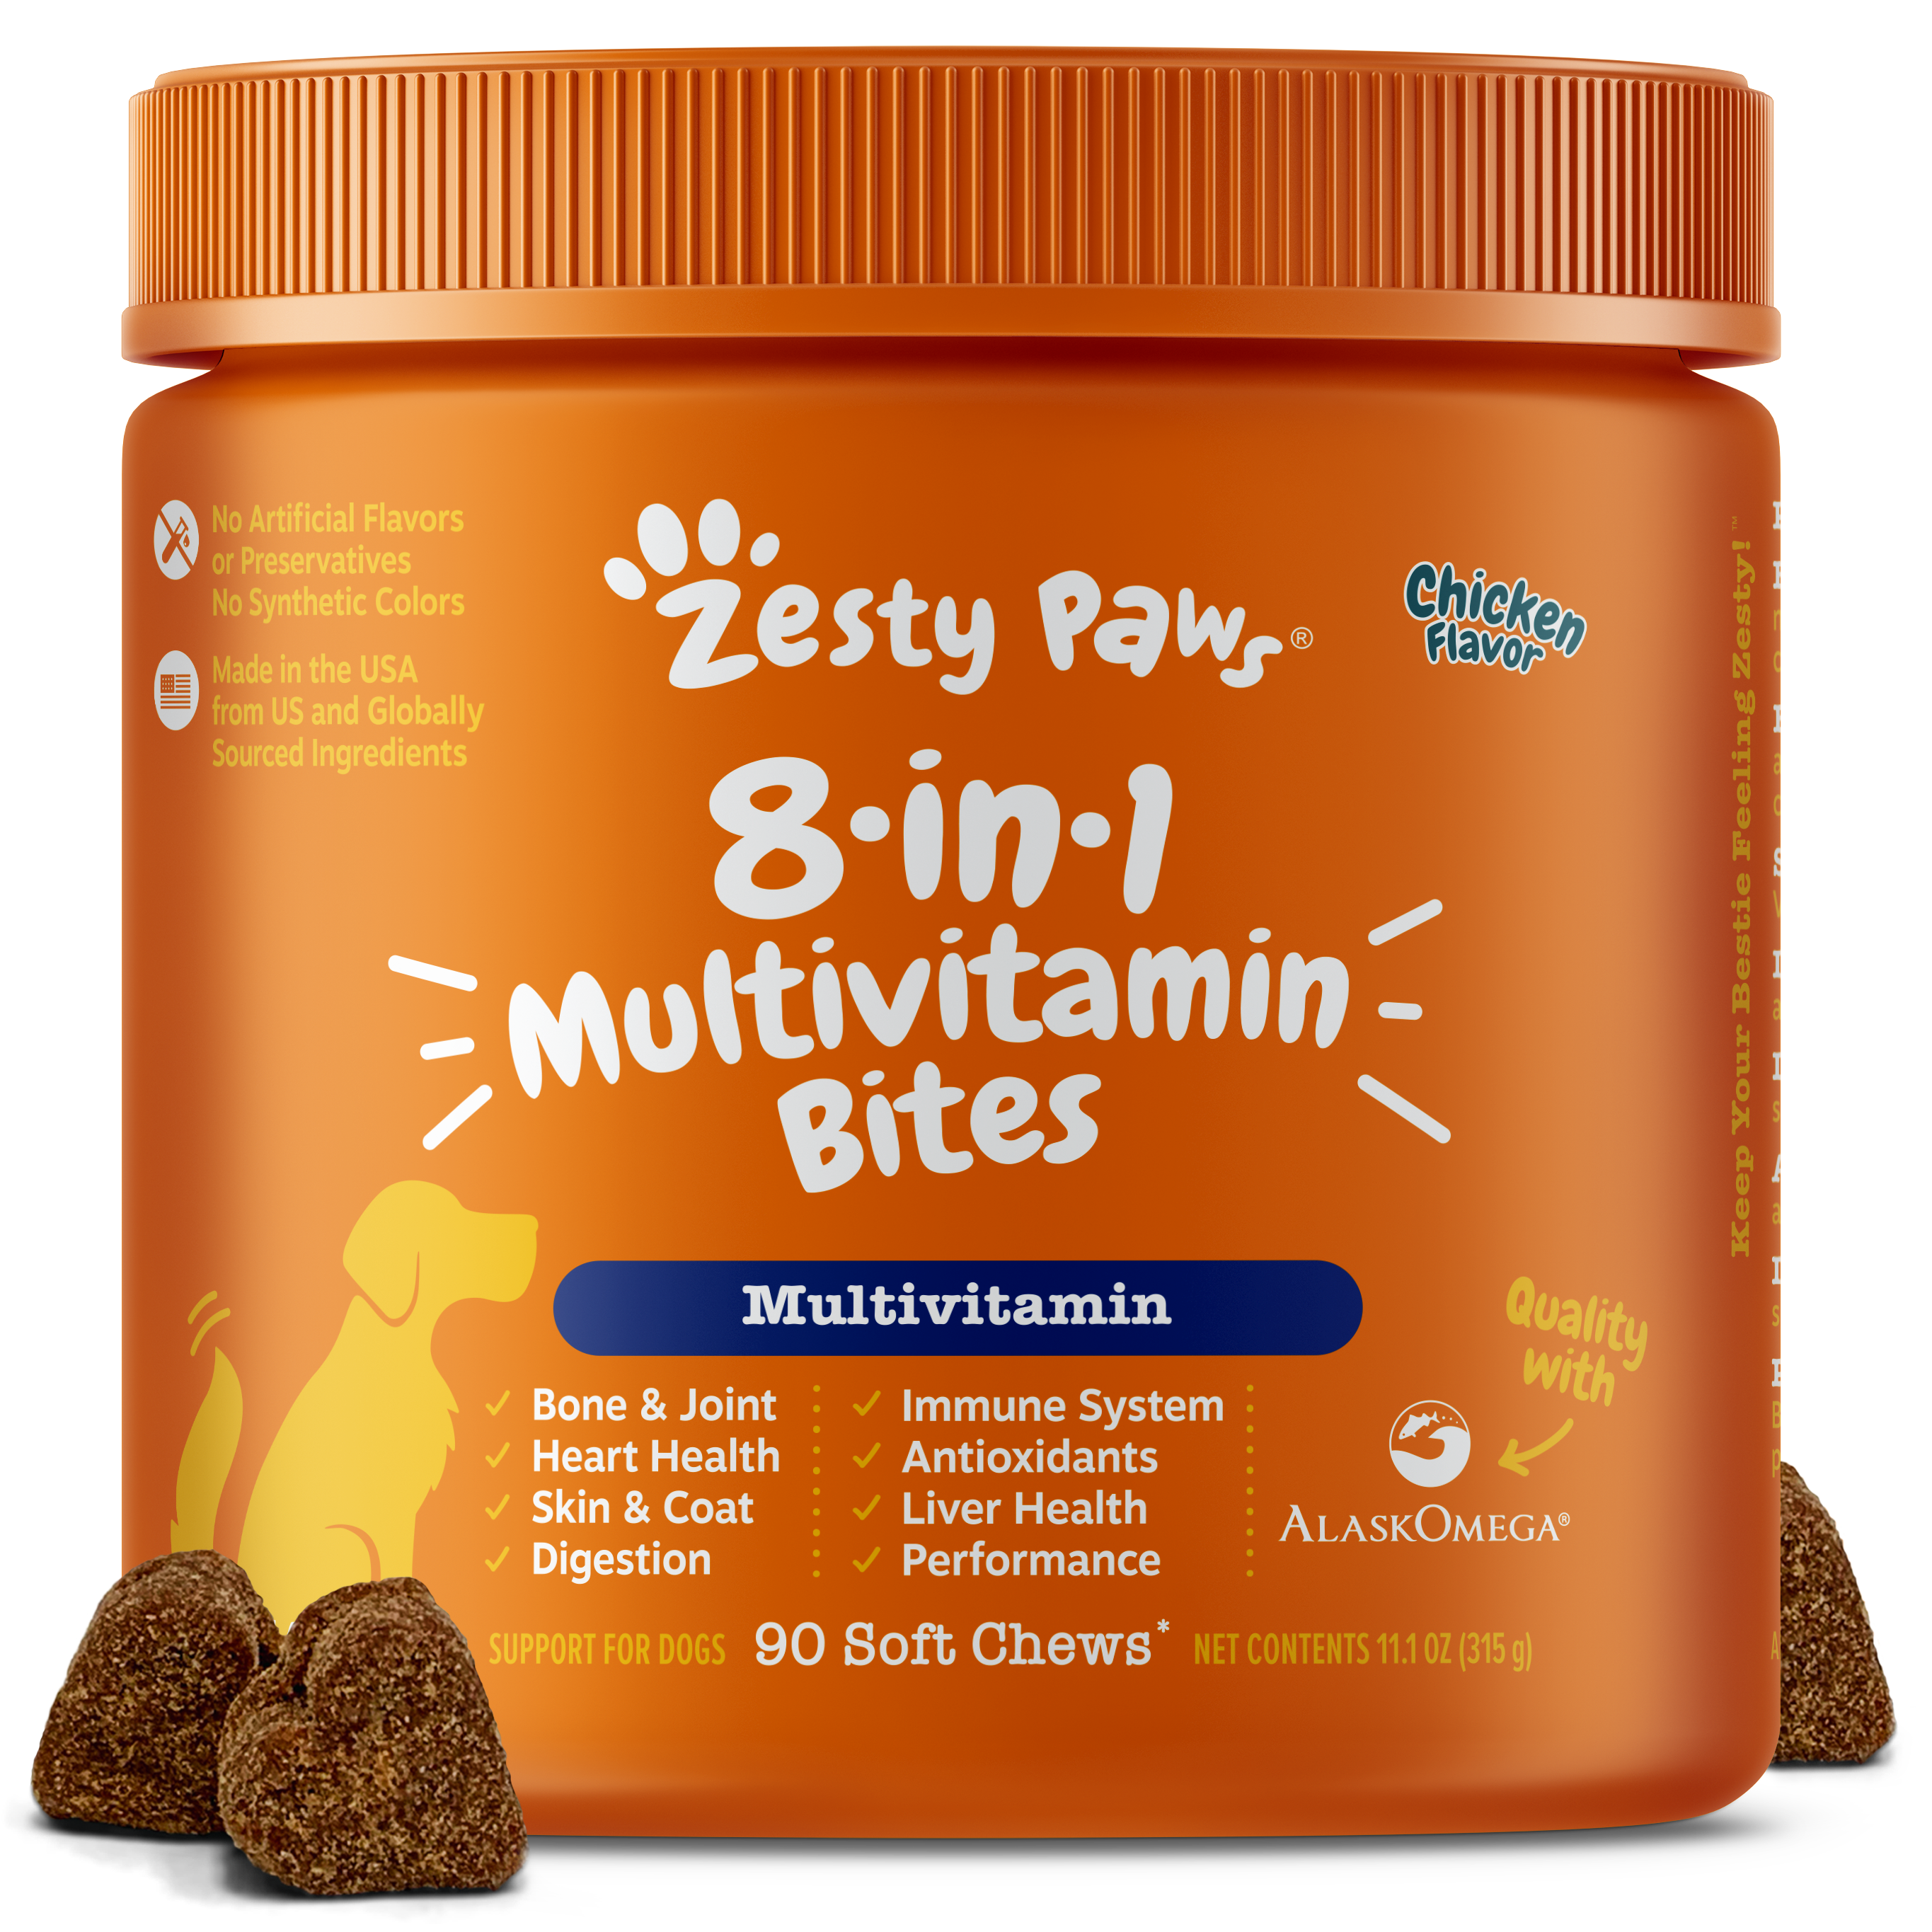 Best of the Zest 3-Pack for Dogs Bundle